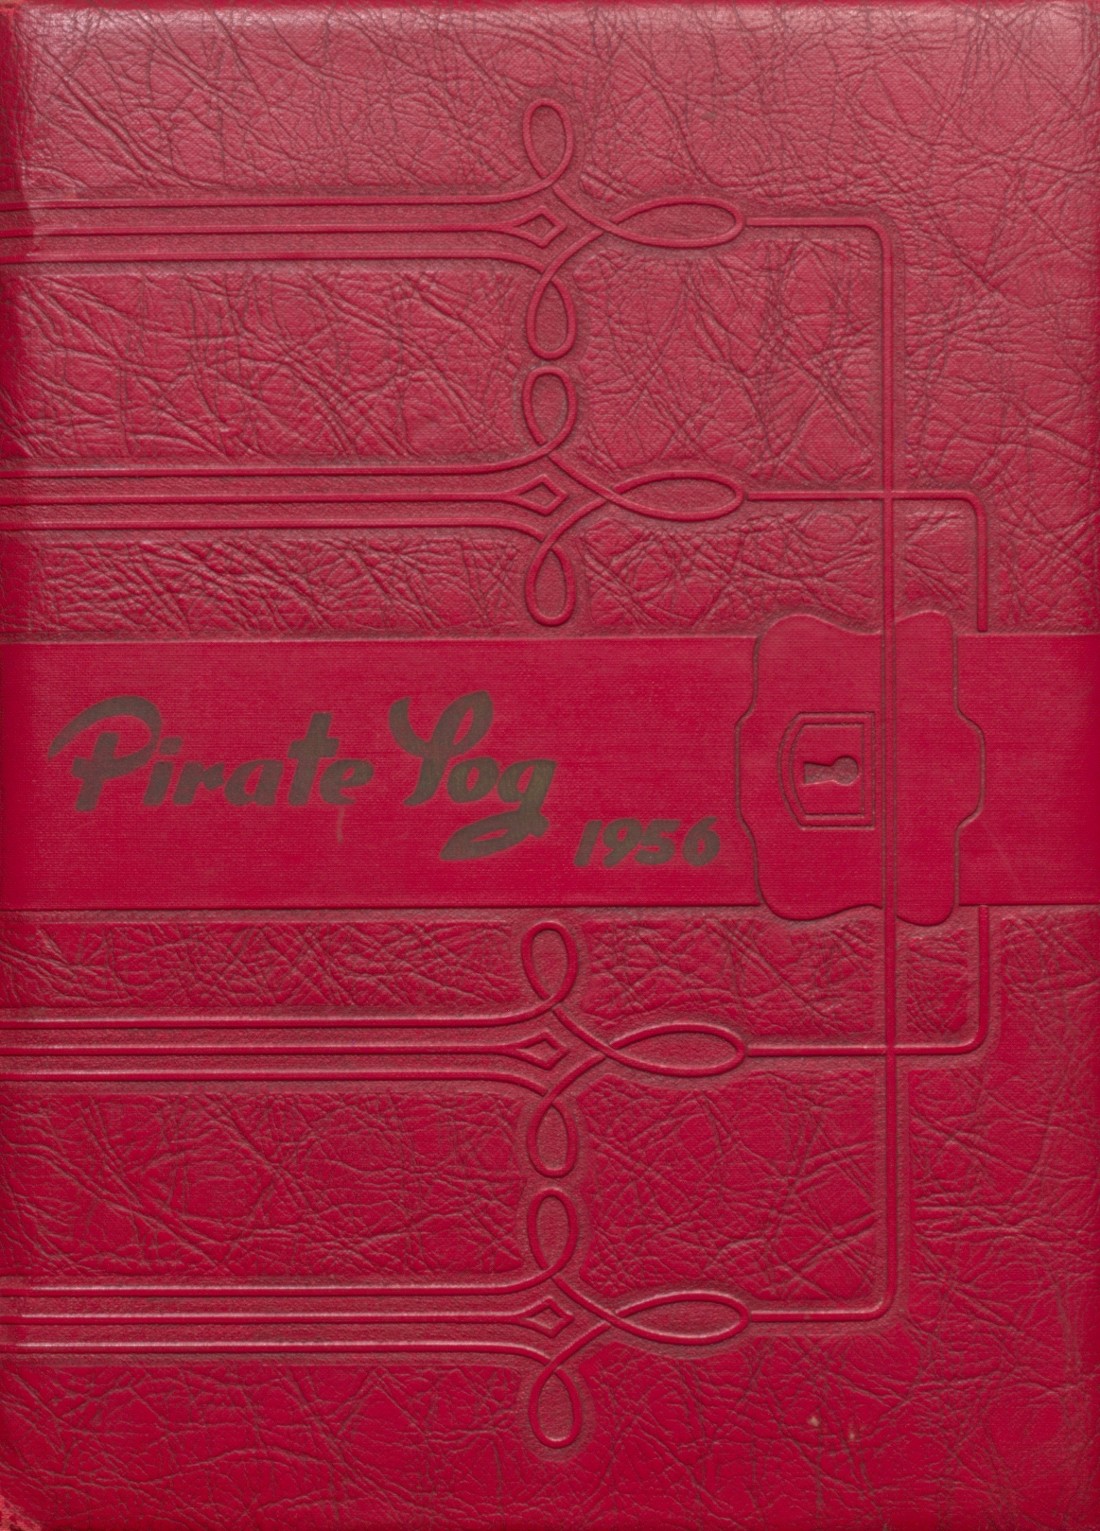 1956-yearbook-from-avon-high-school-from-avon-south-dakota-for-sale